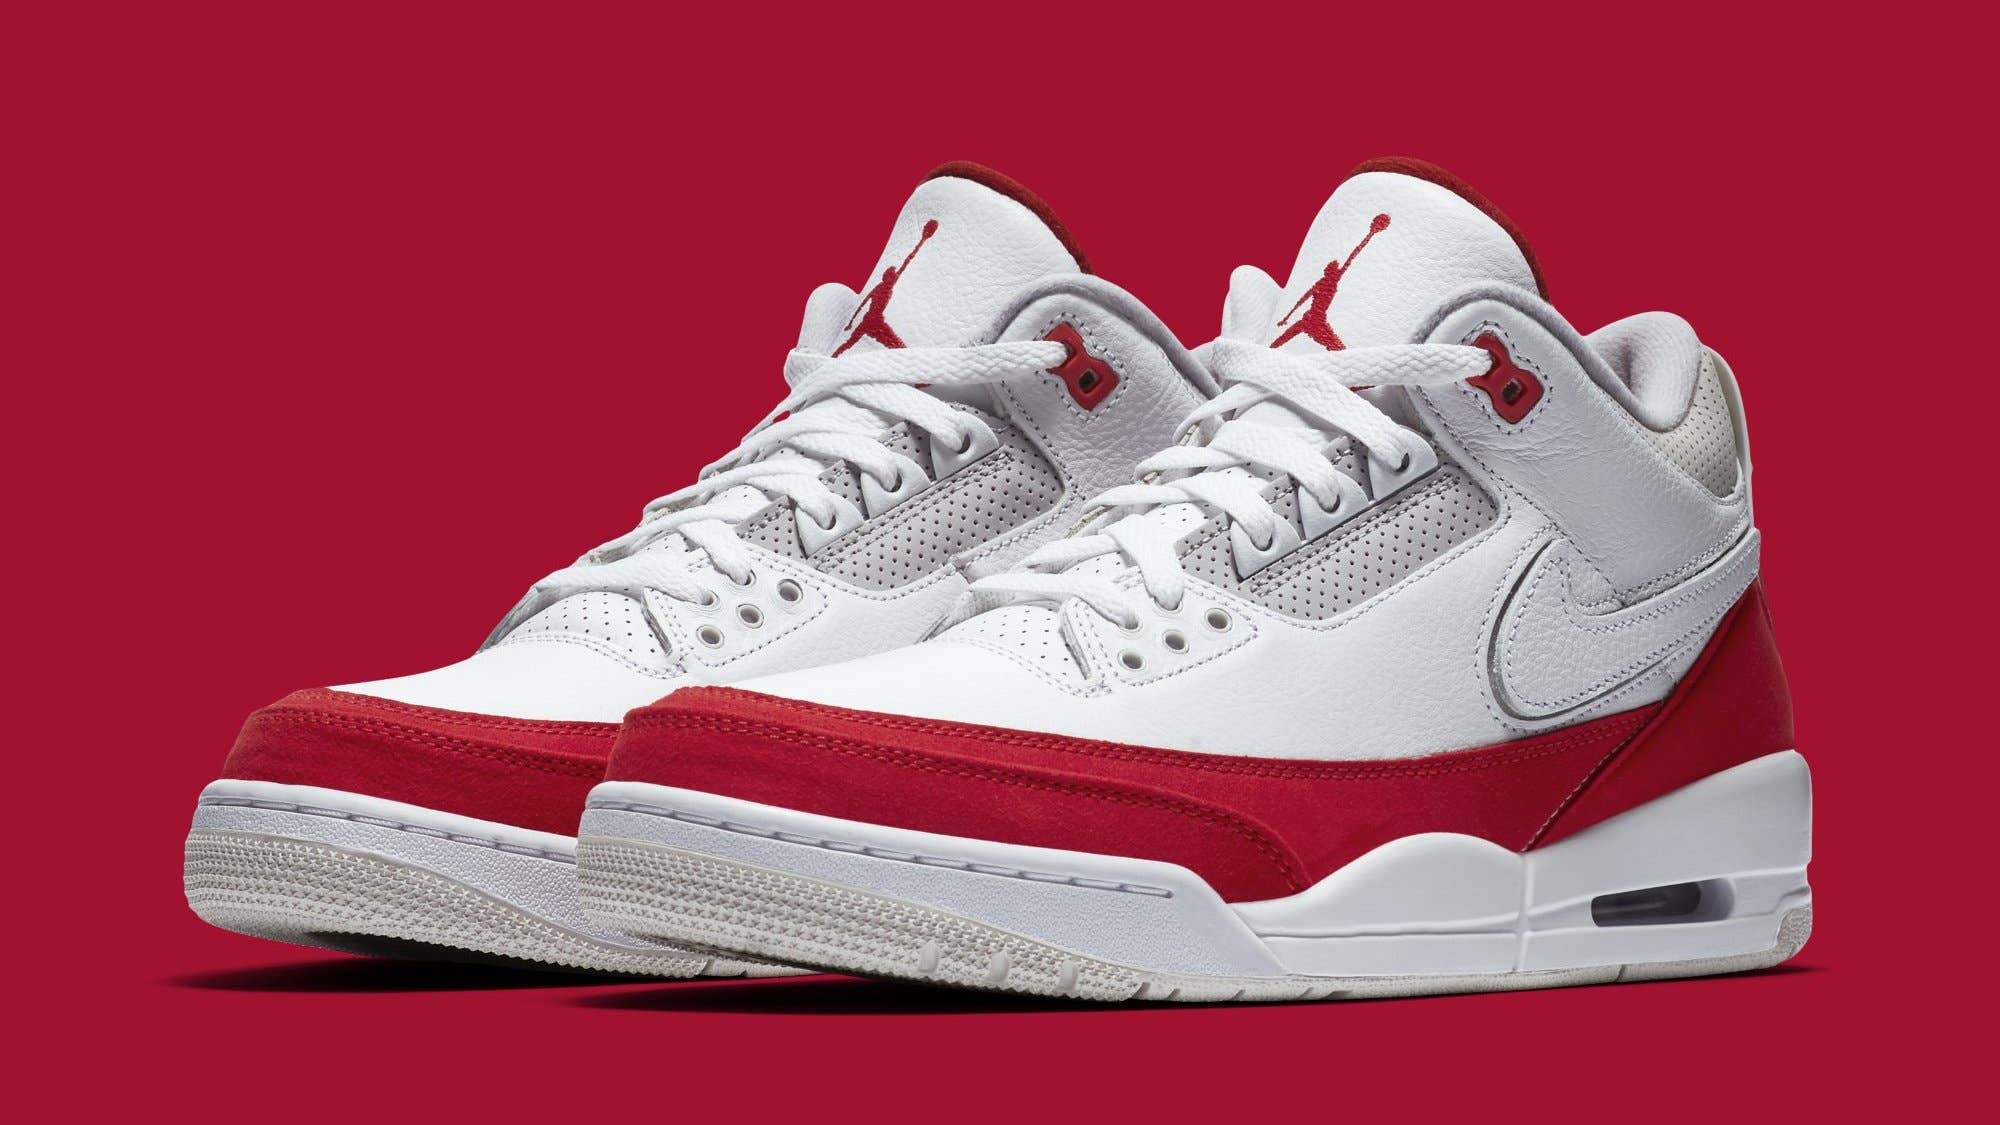 The Air Jordan 3 Tinker 'University Red' Will Have Interchangeable Swoosh  Logos - The Source